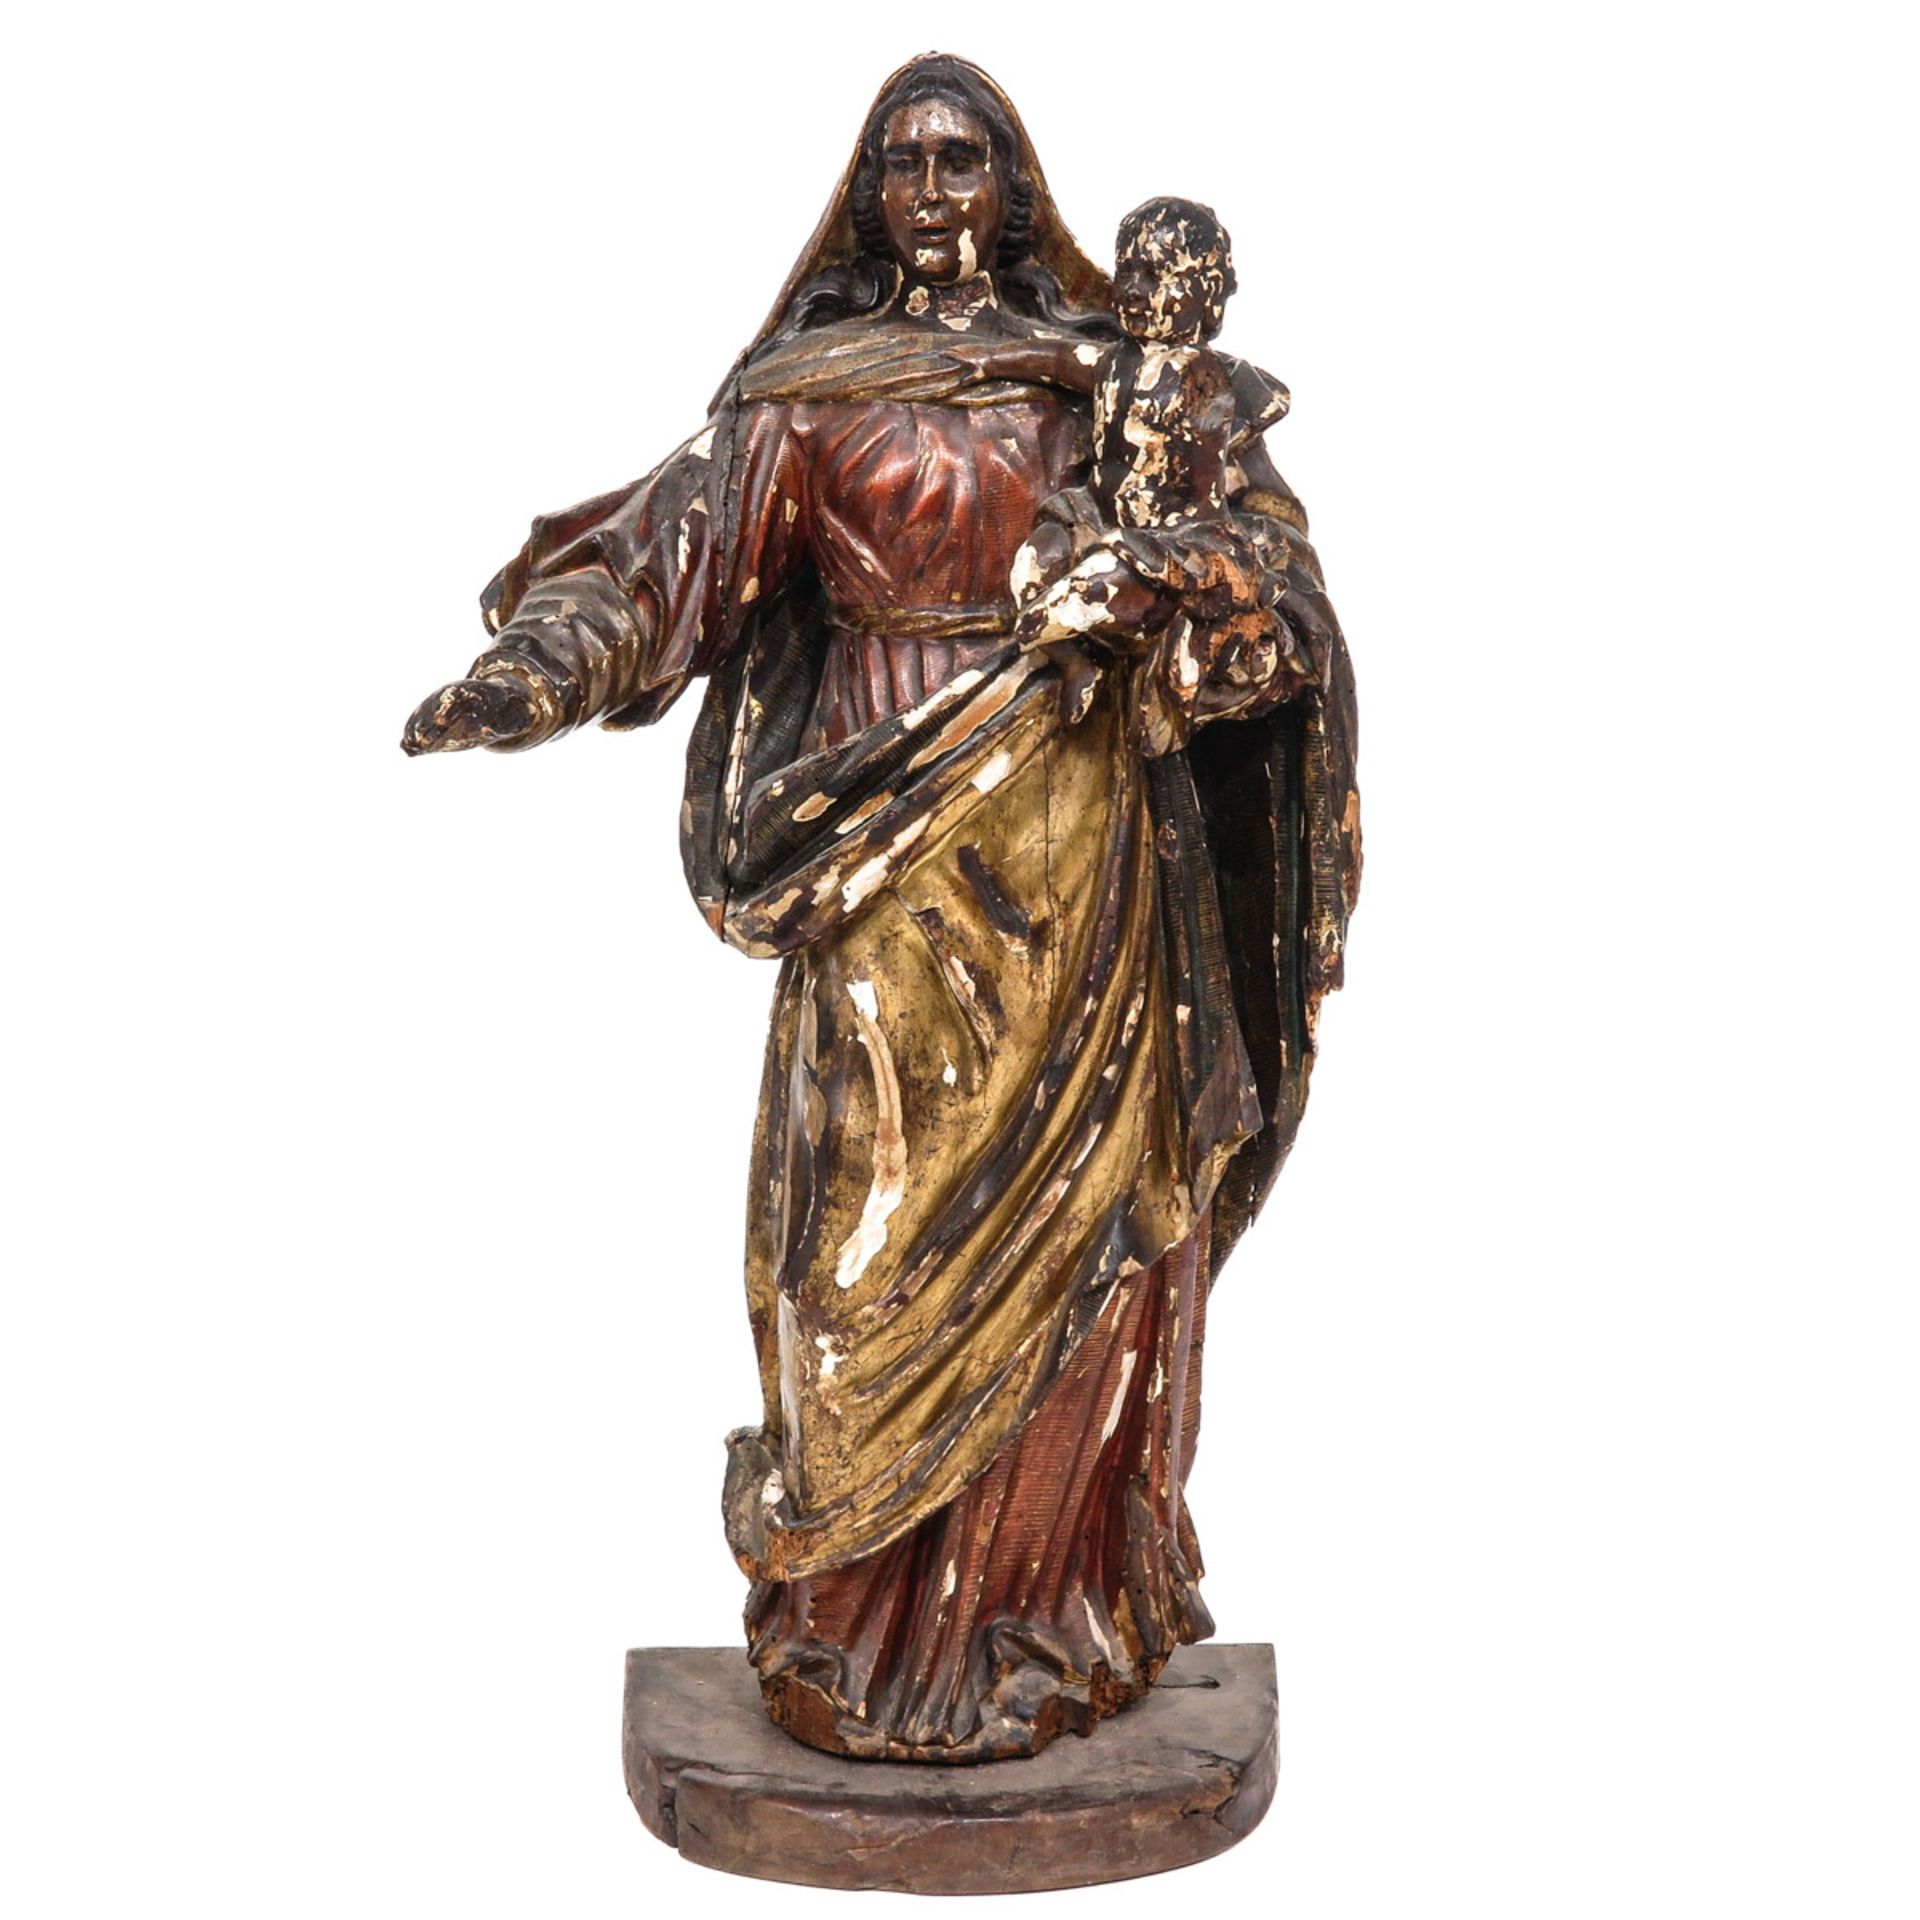 A Wood Sculpture of the Black Madonna